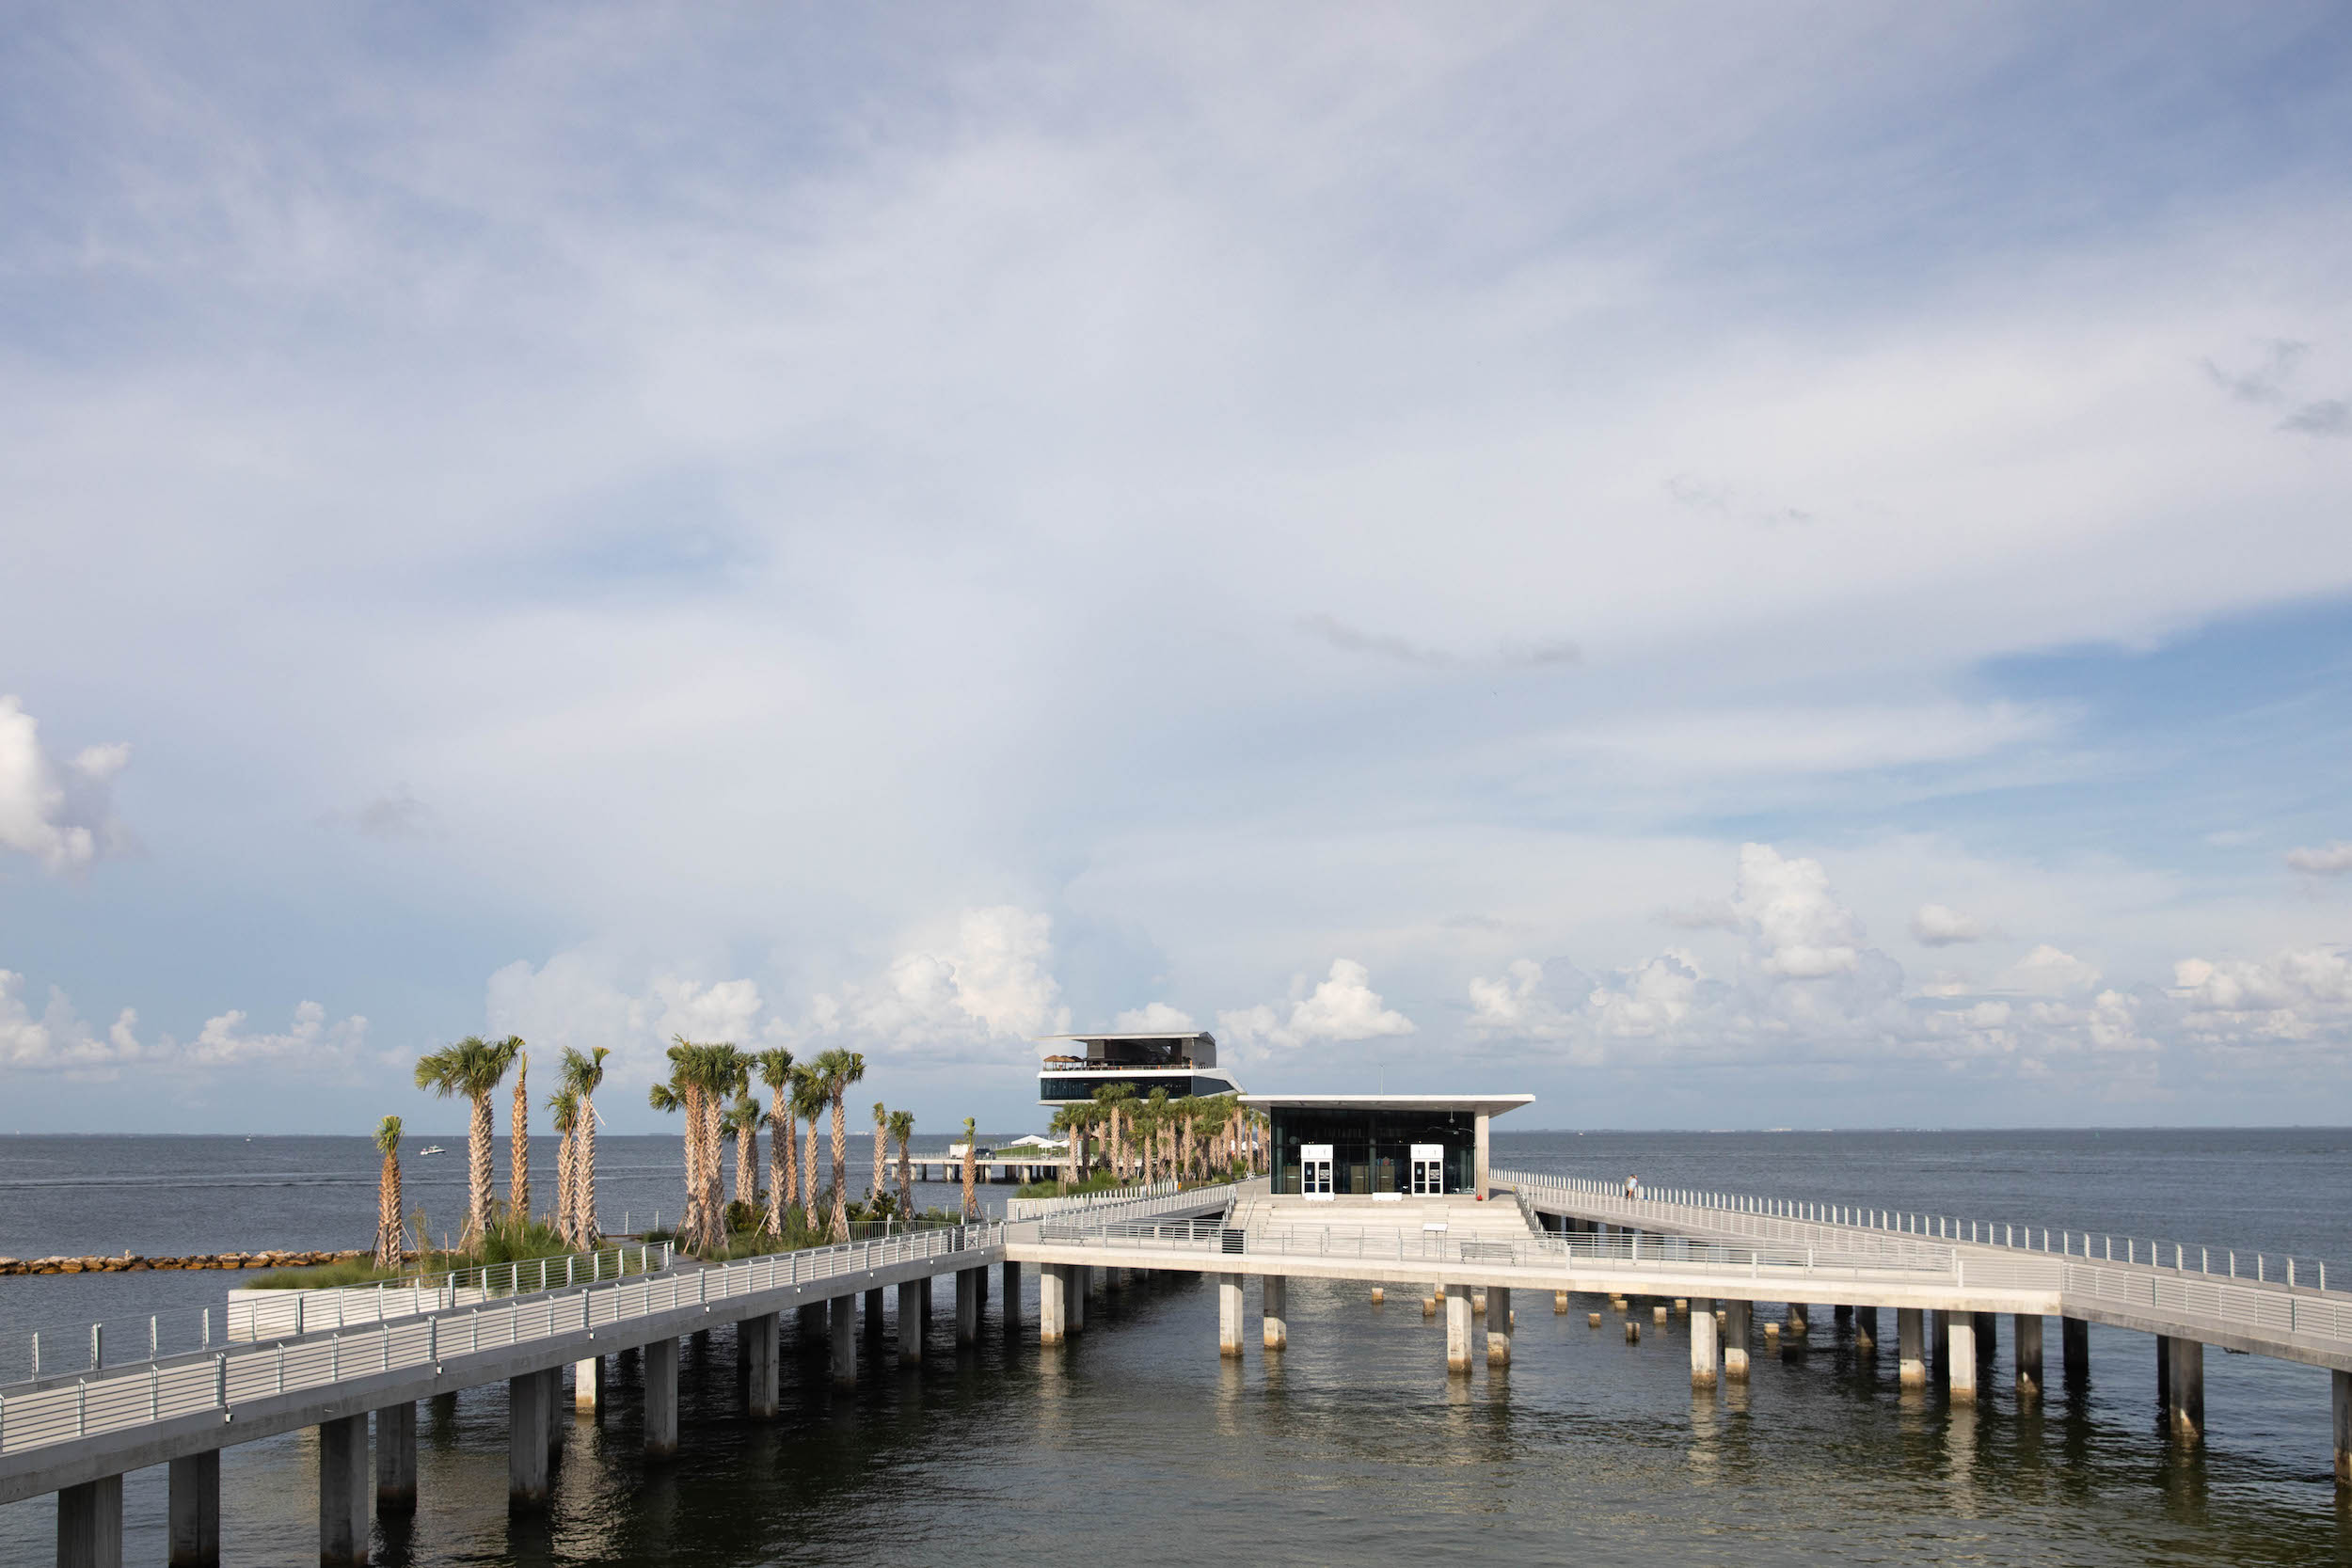 St. Pete Pier activates the waterfront and beyond in Florida